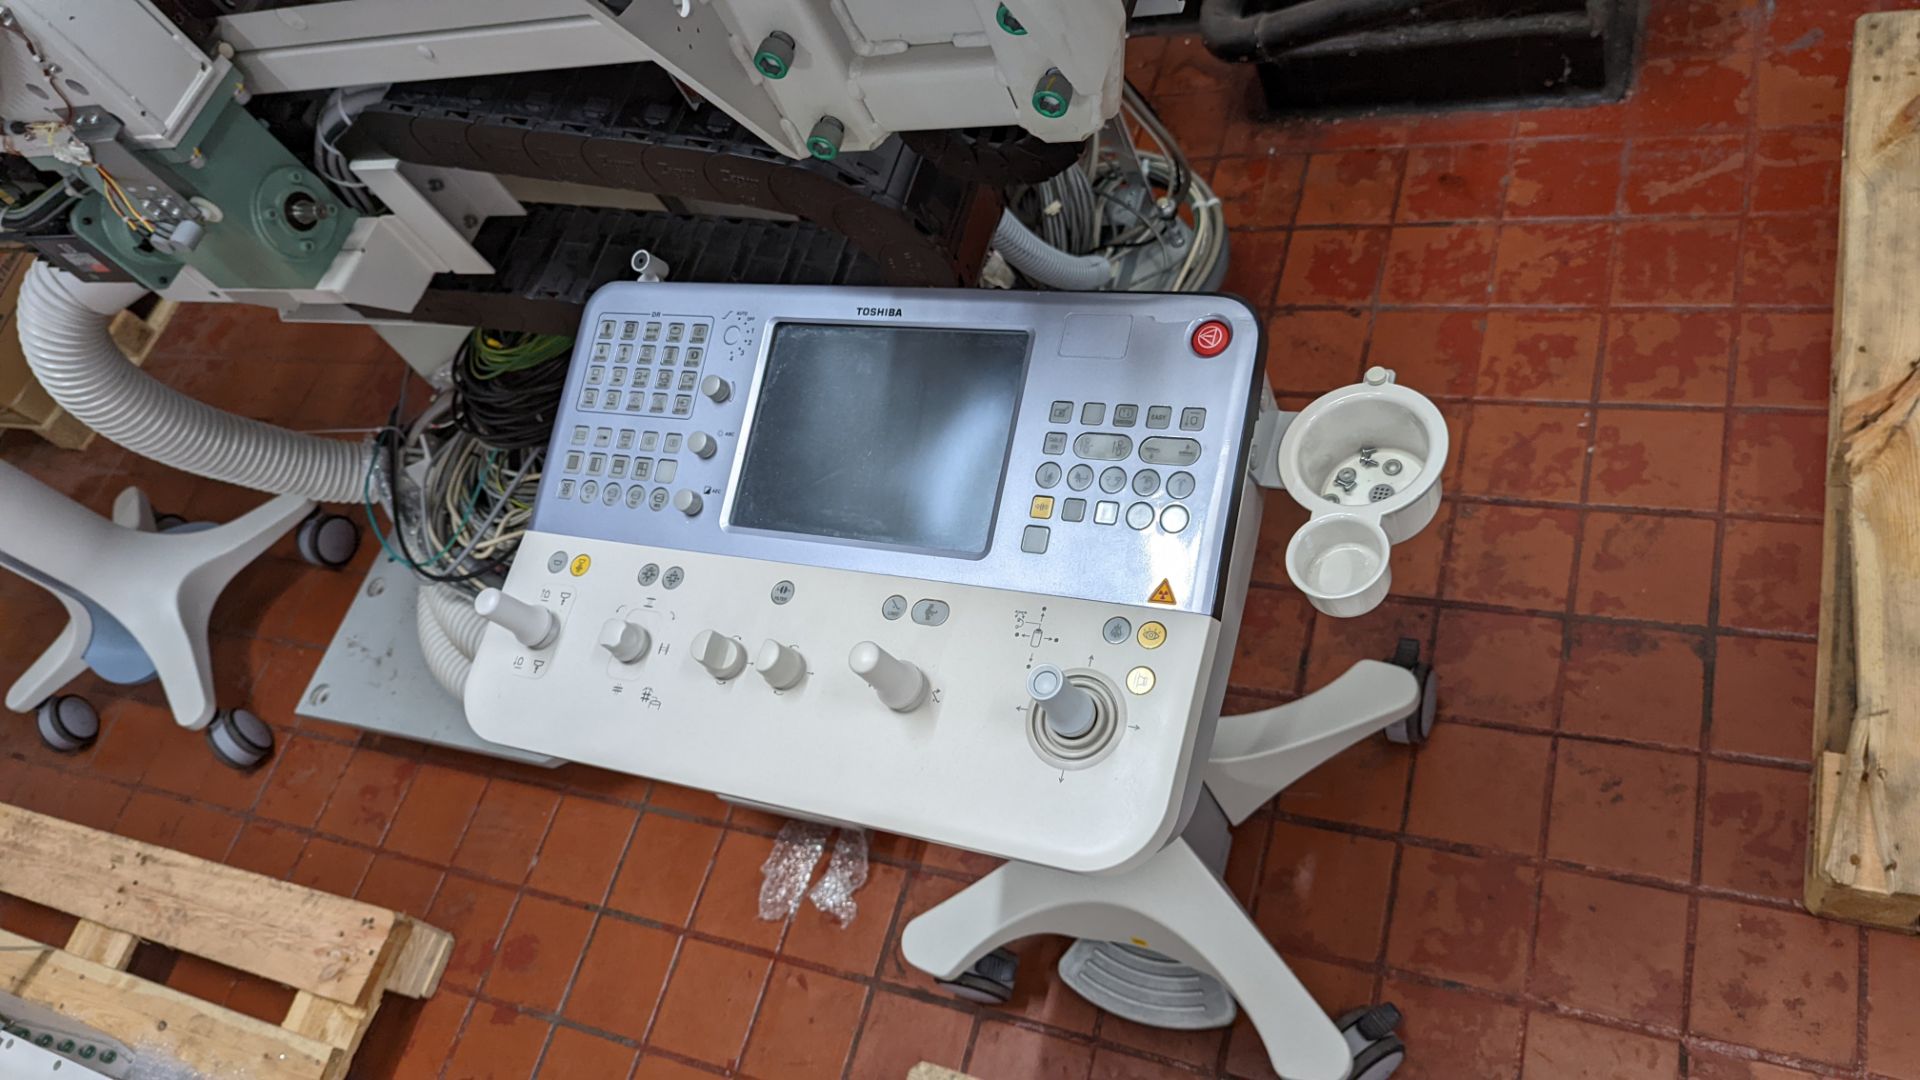 2015 Ultimax-i multipurpose X-ray system with accessories. This item was purchased new in late 2015 - Image 31 of 52